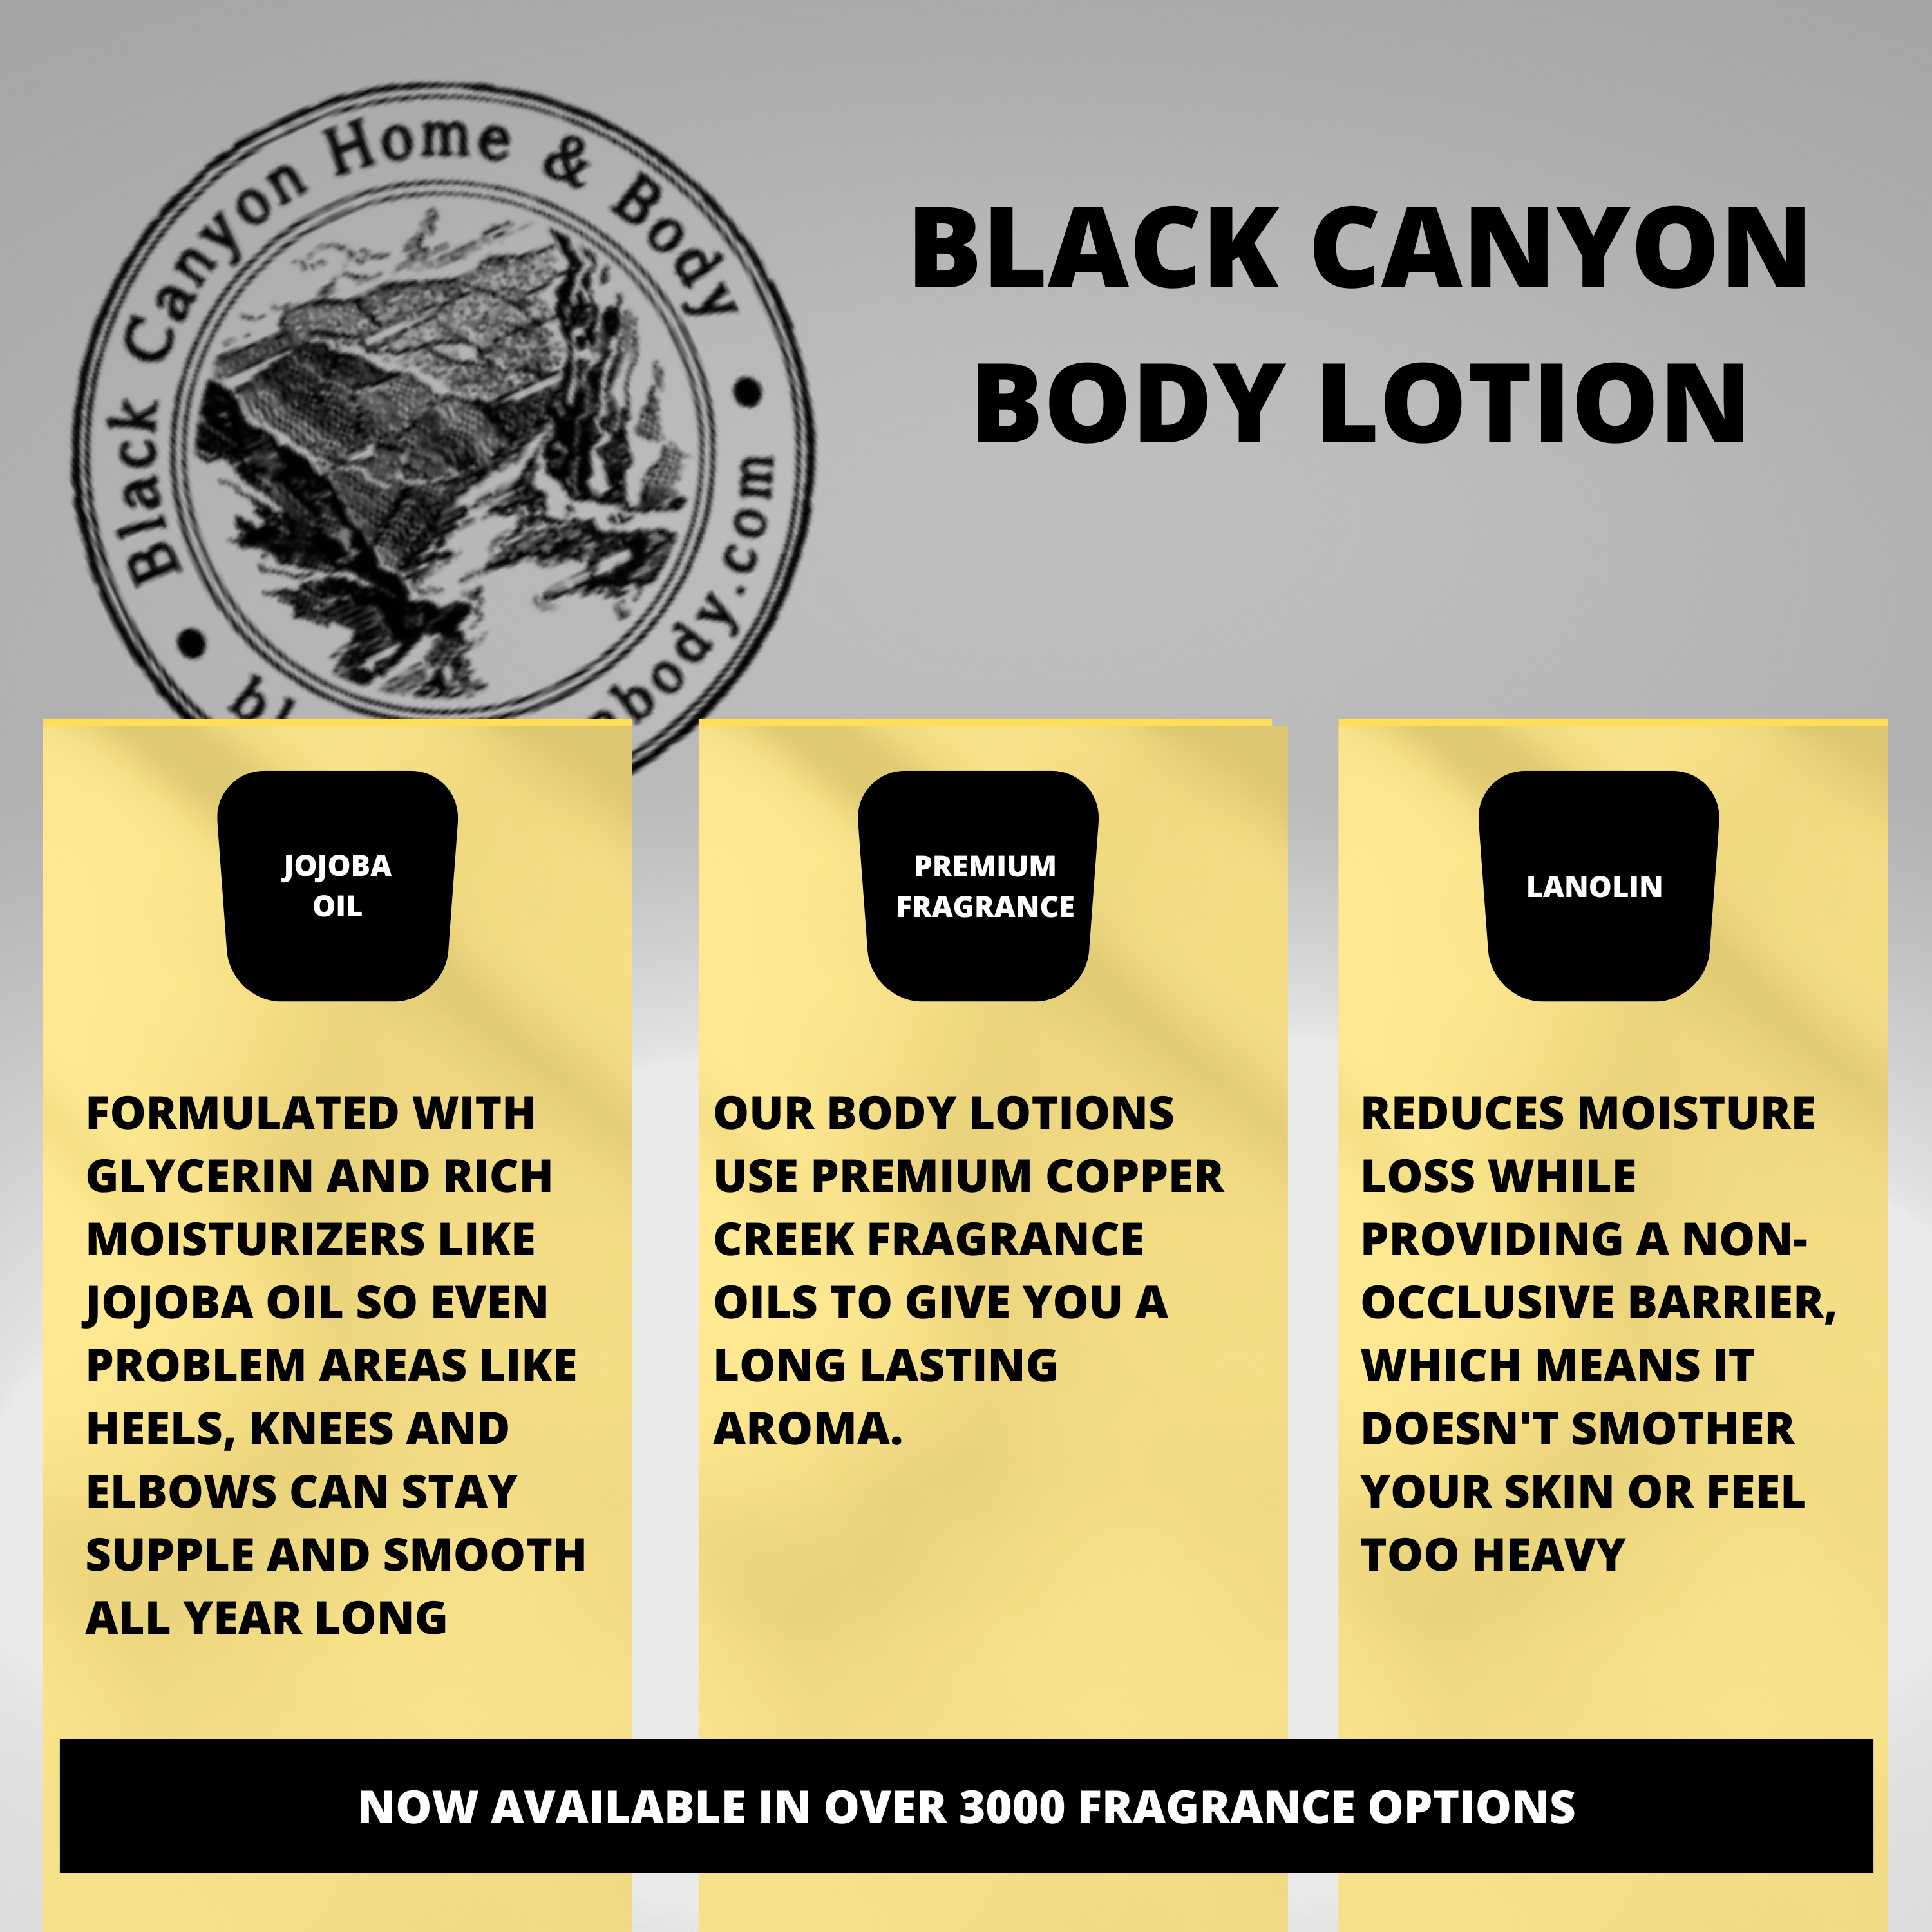 Black Canyon Cinnamon Sugar Cookie Scented Luxury Body Lotion with Lanolin and Jojoba Oil